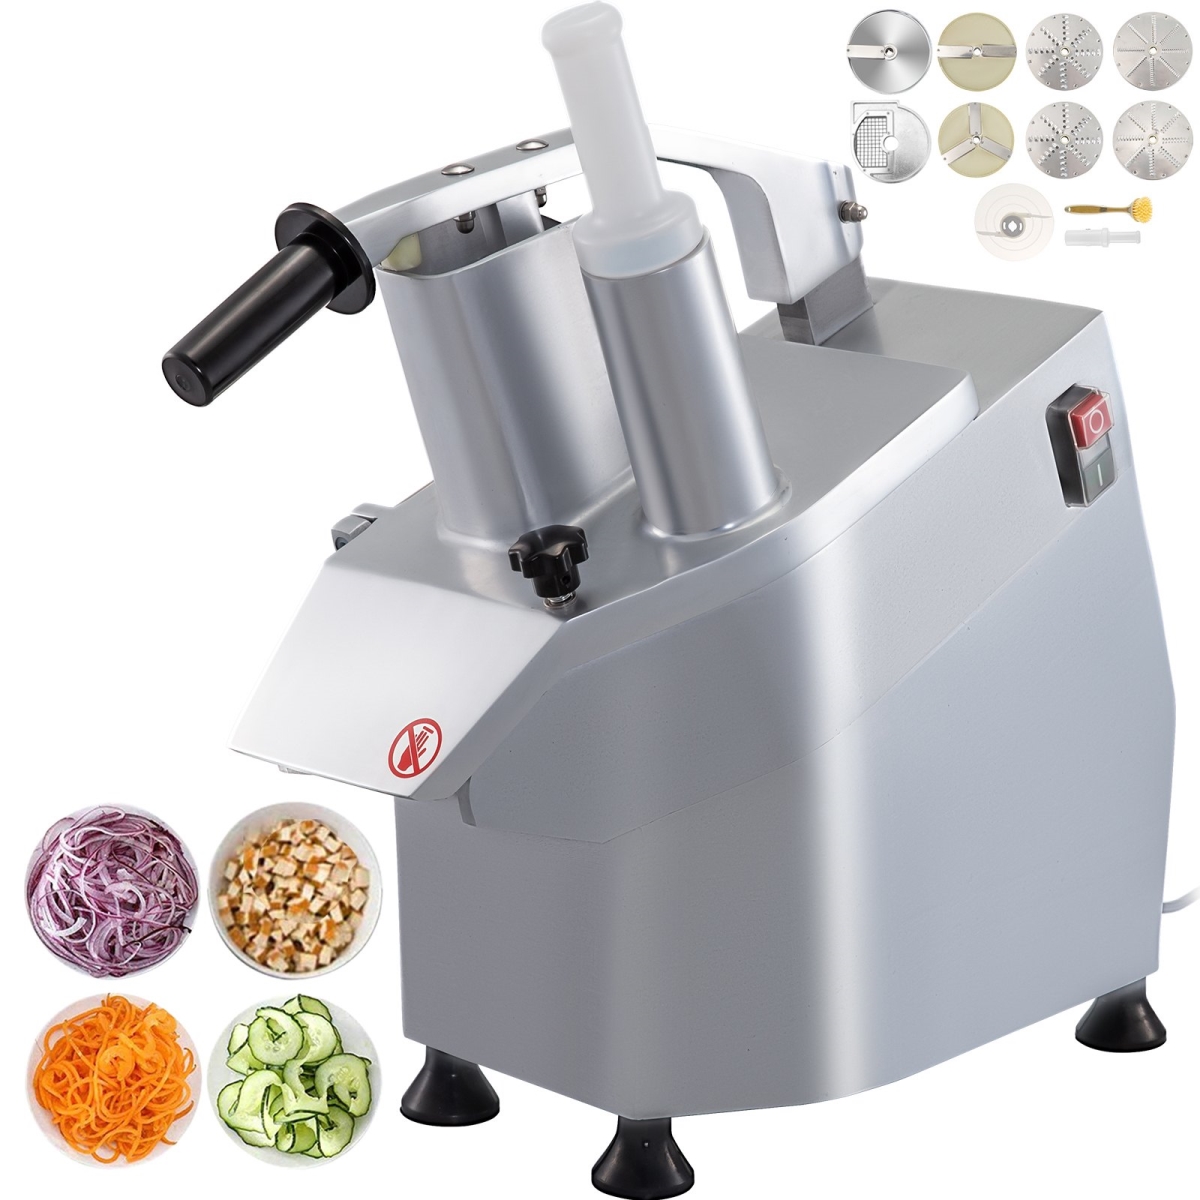 VEVOR QCJJKC-300-DDPHZHV1 Commercial Food Processor Vegetable Cheese Cutter with 7 Disks